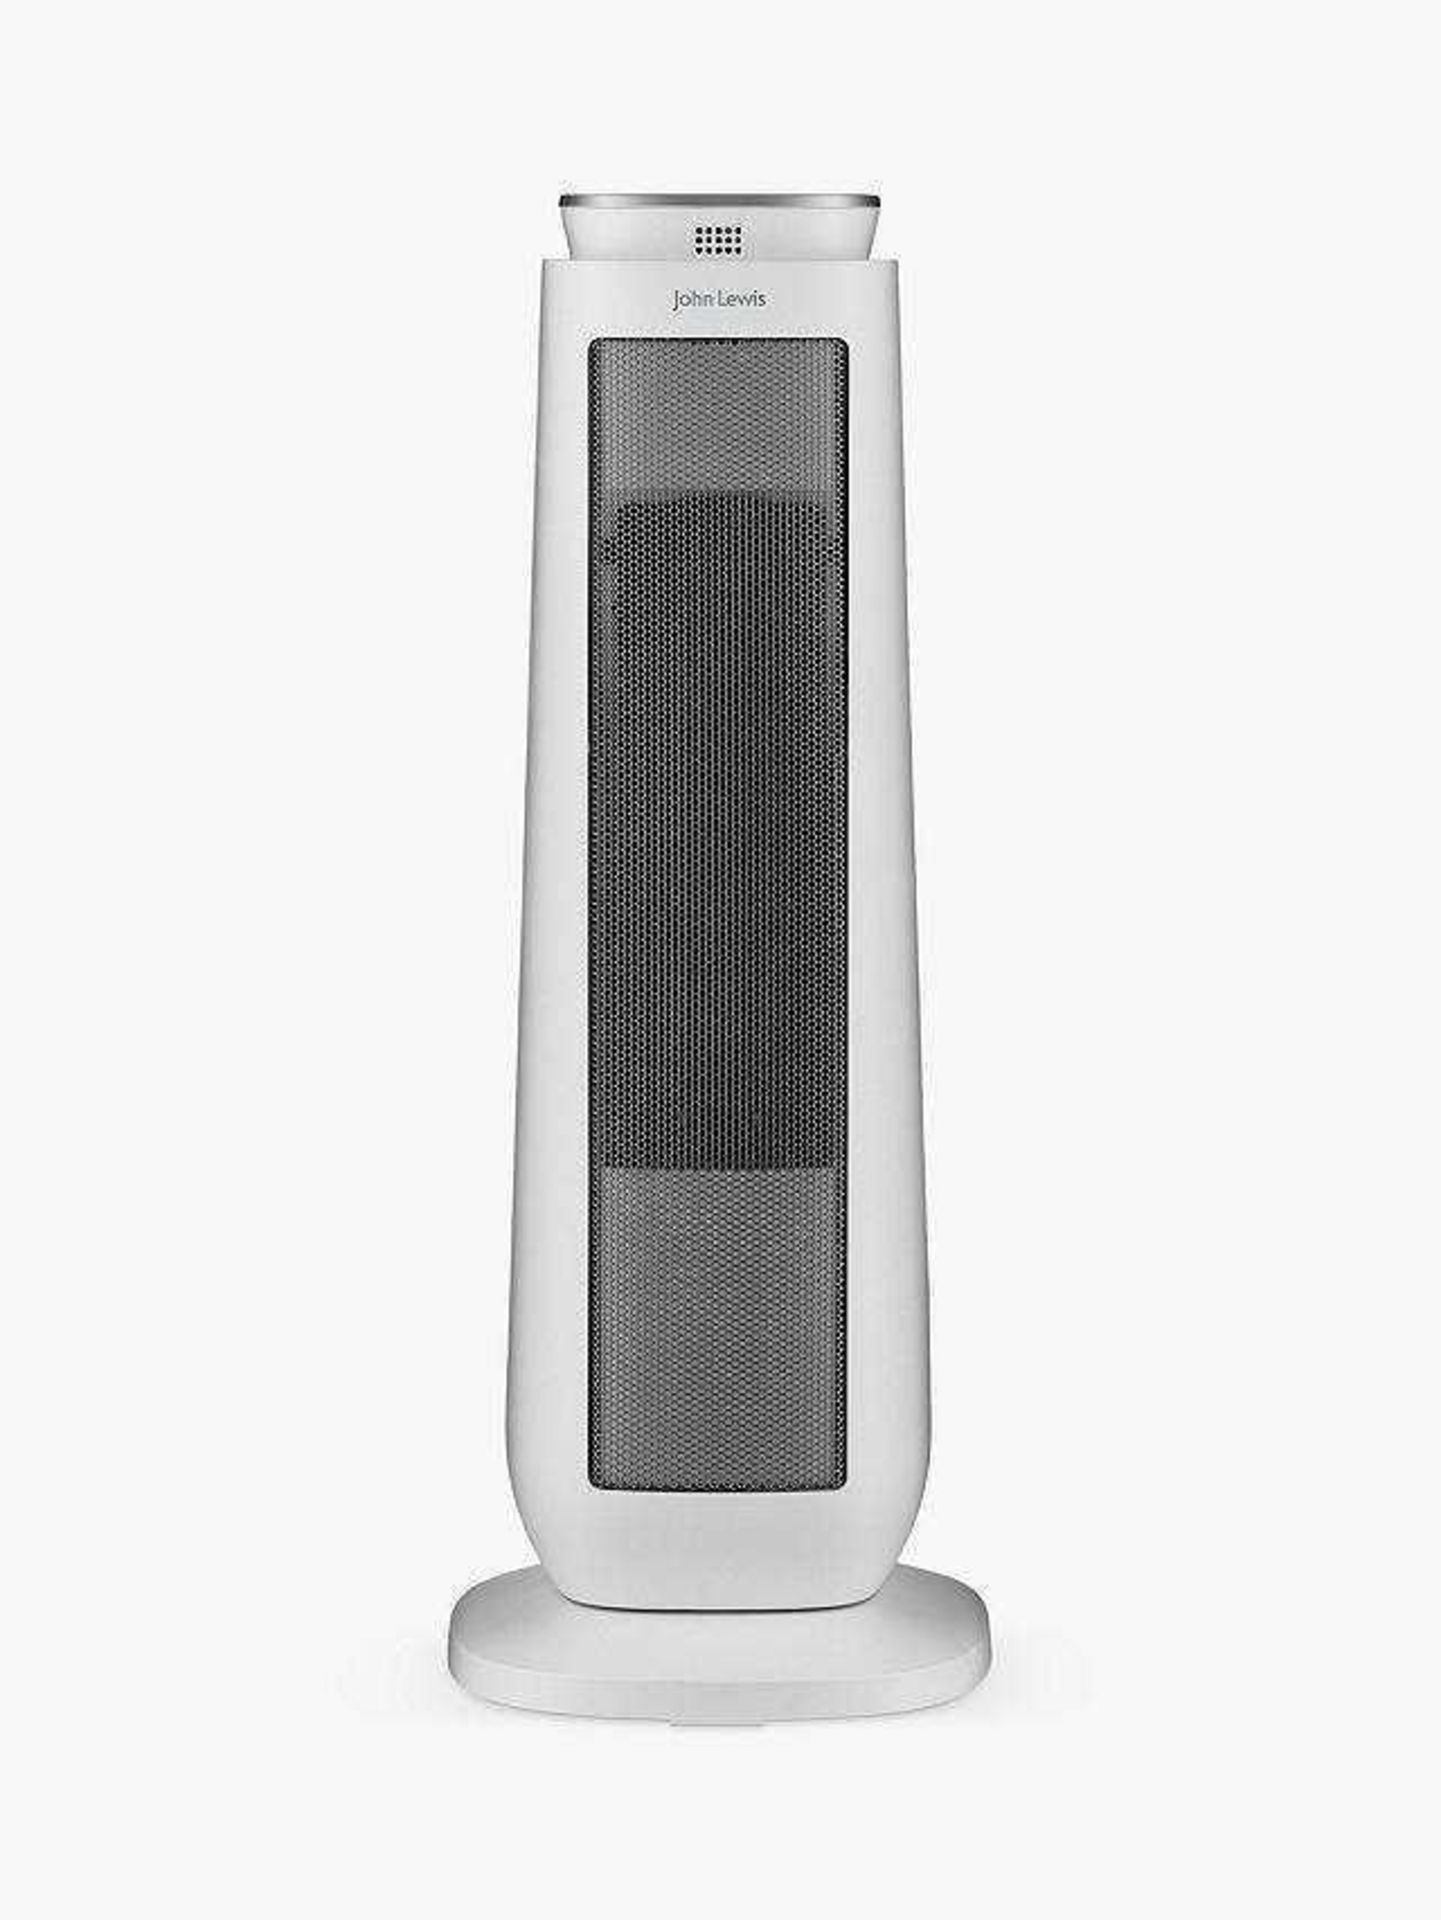 RRP £50 Each Boxed John Lewis Oscillating Tower Heater